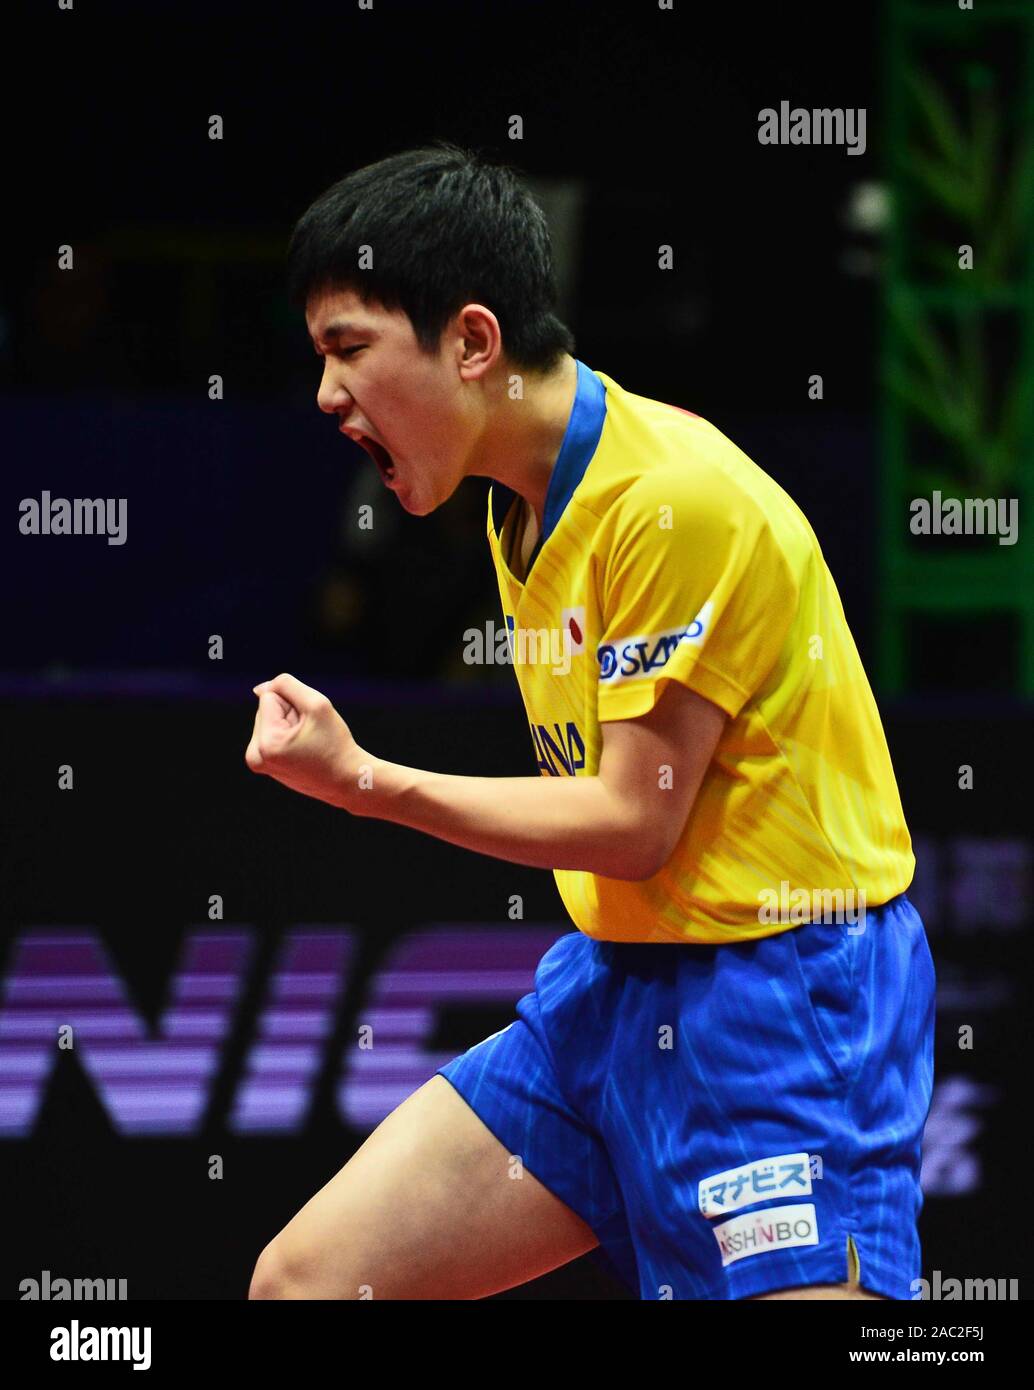 Tomokazu Harimoto of Japan reacts after defeating Koki Niwa of Japan in their Men's Singles Quarterfinals match during the 2019 ITTF Men's World Cup i Stock Photo